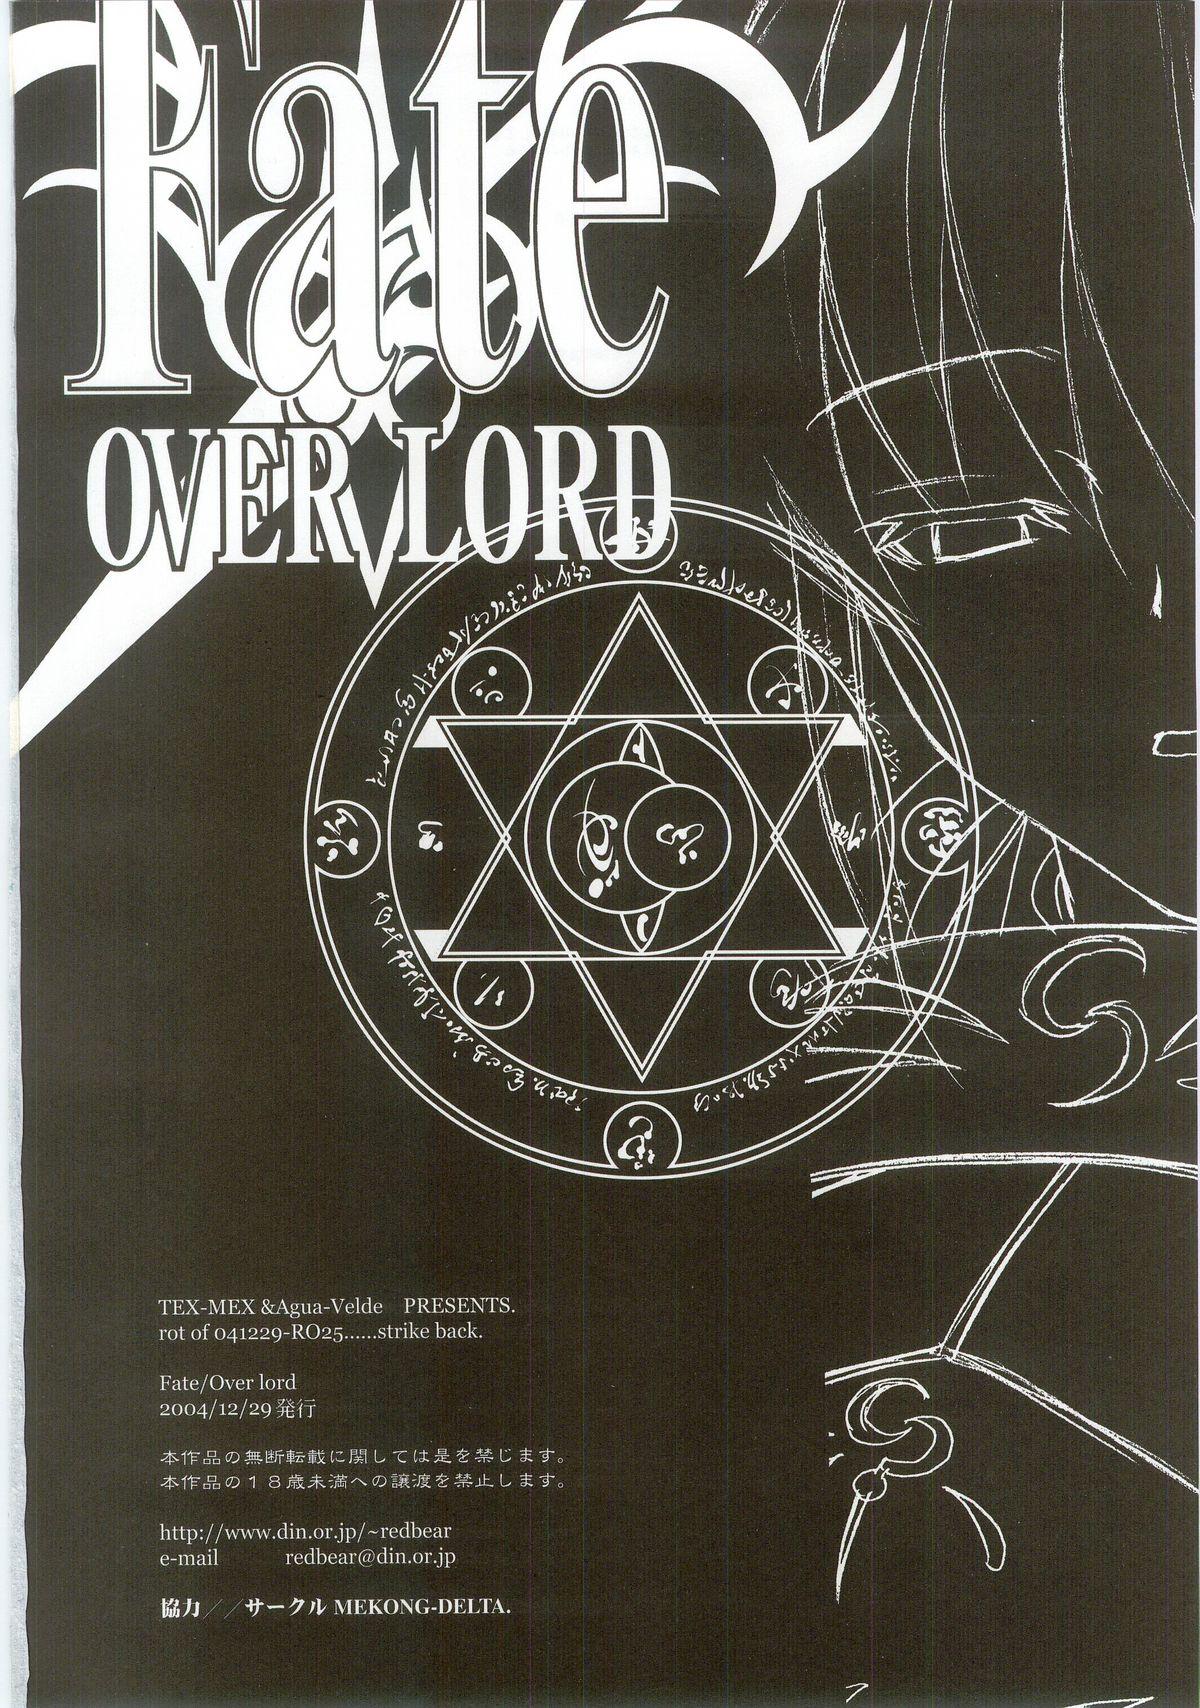 Fate/Over lord 32